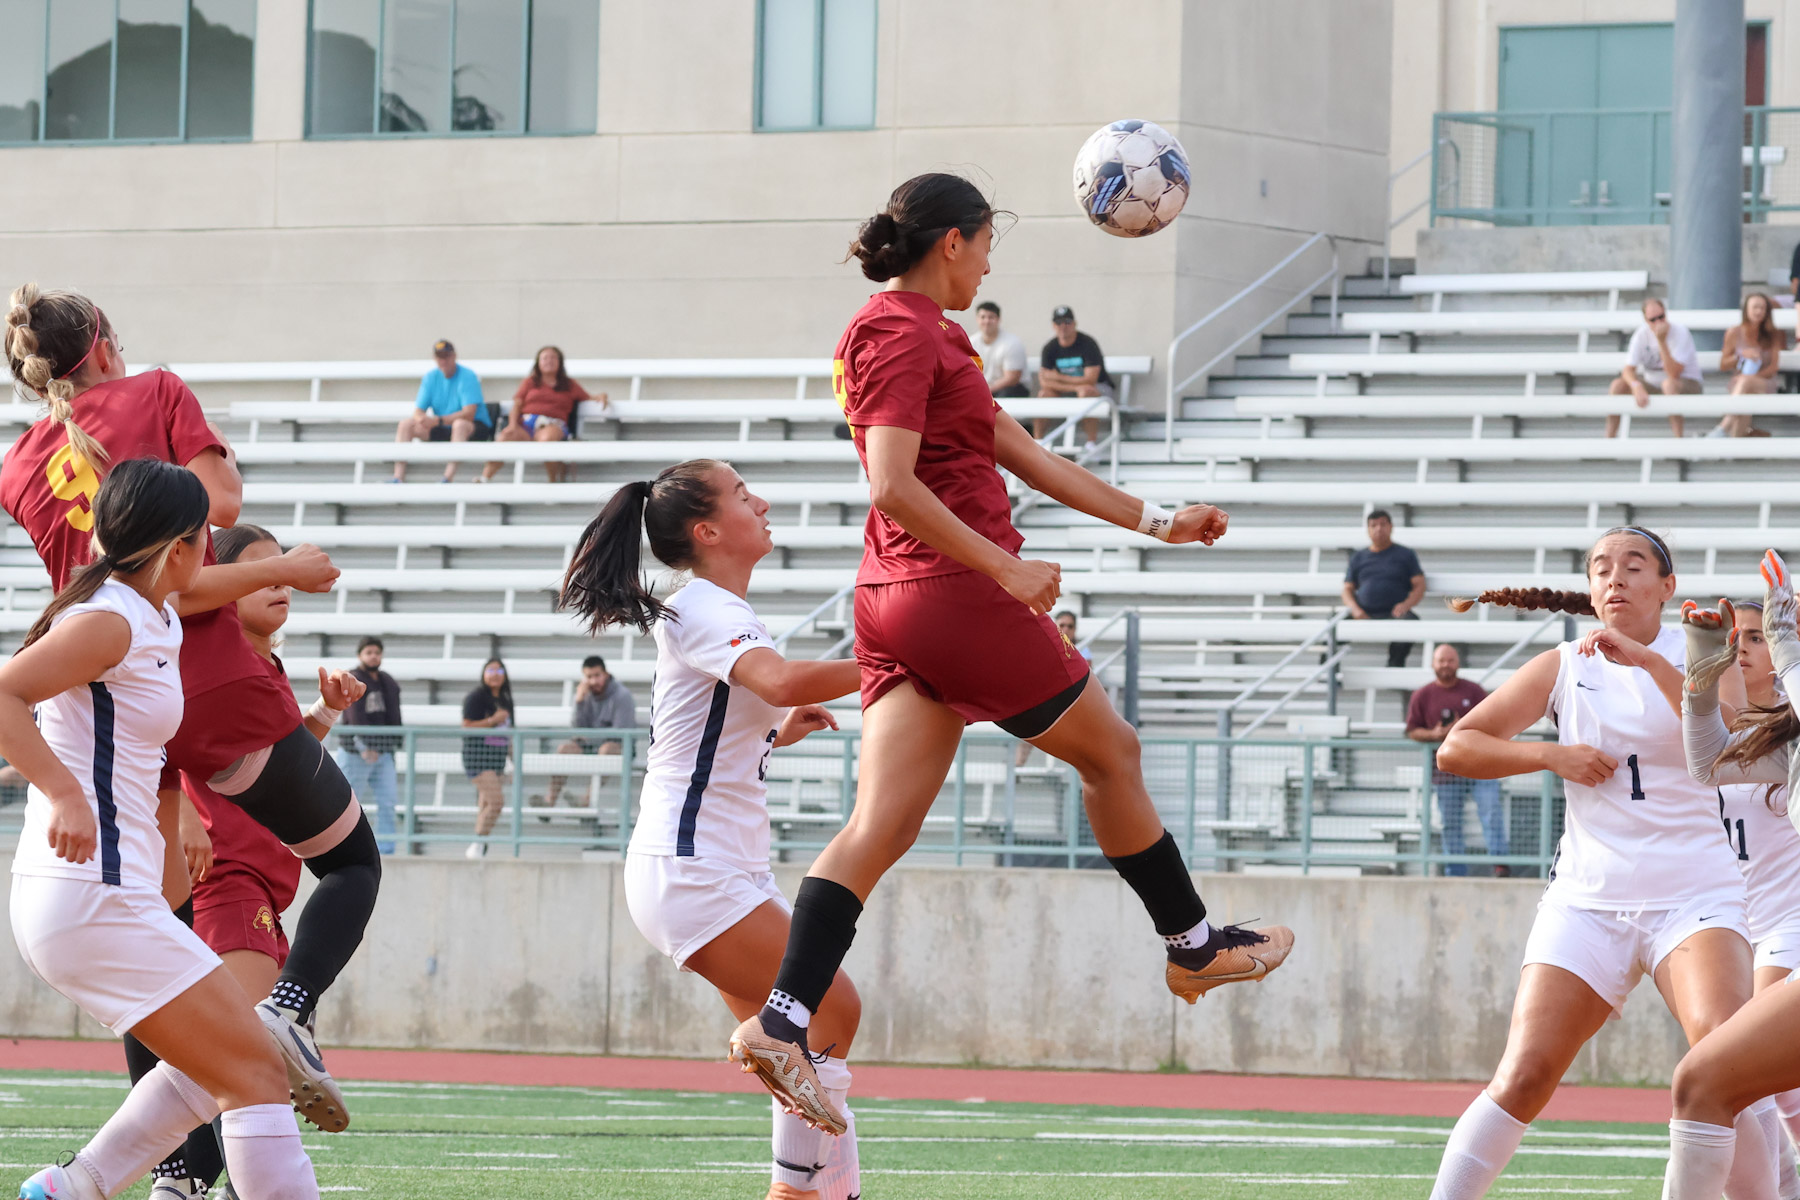 Itzel Nunez heads the ball during the Lancers win v. Irvine Valley on Tuesday (photo by Richard Quinton).